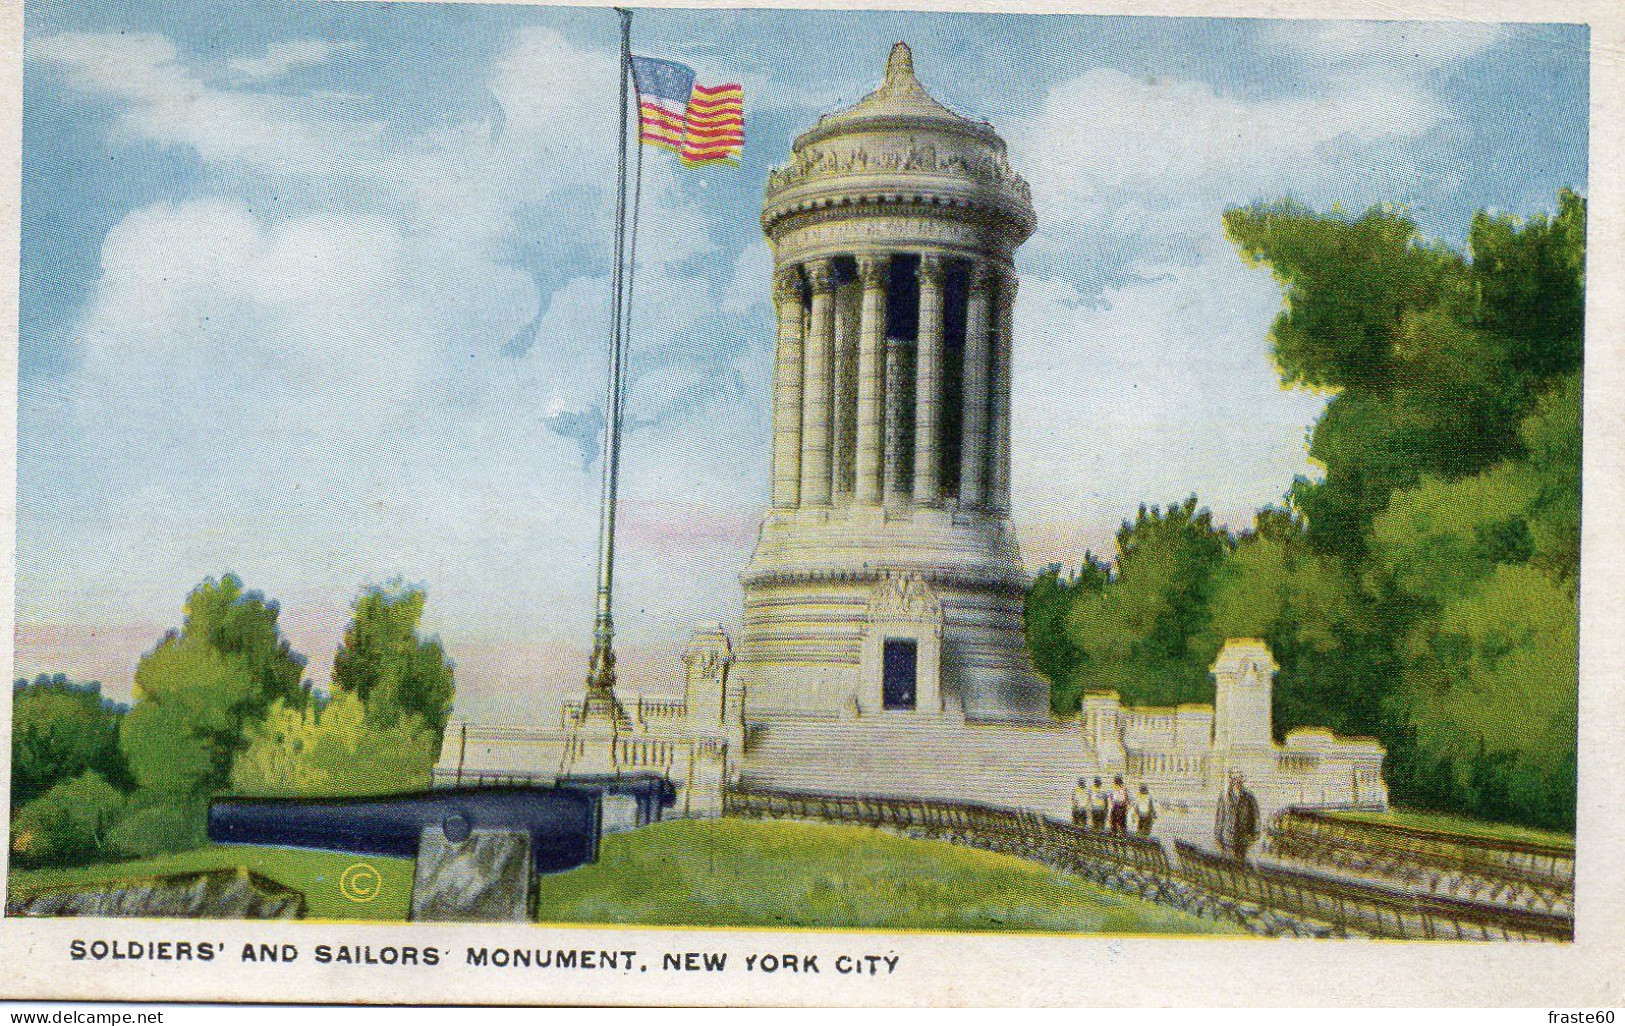 New York City - Soldiers And Sailors Monument - Andere Monumente & Gebäude